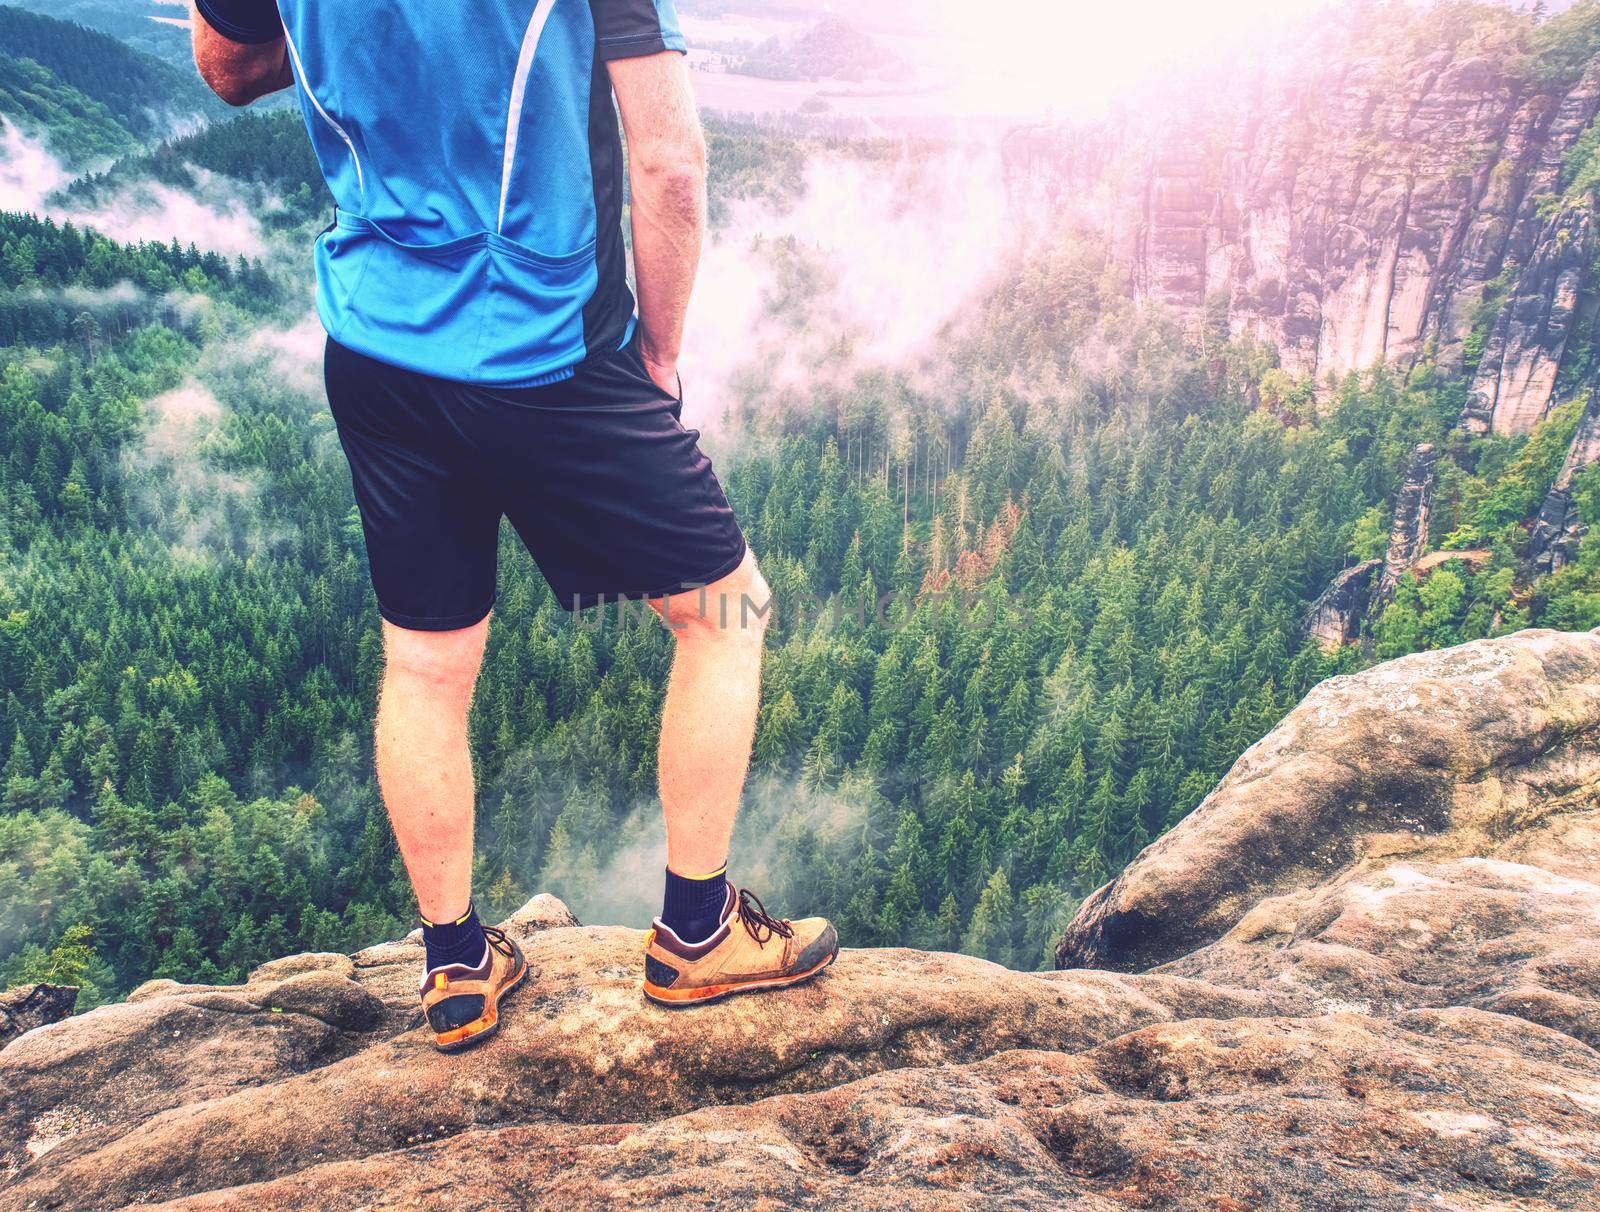 Hiker legs climbing on sunrise mountain peak rock. Slim  legs of a mountain hiker with hiking boots on exposed rock.